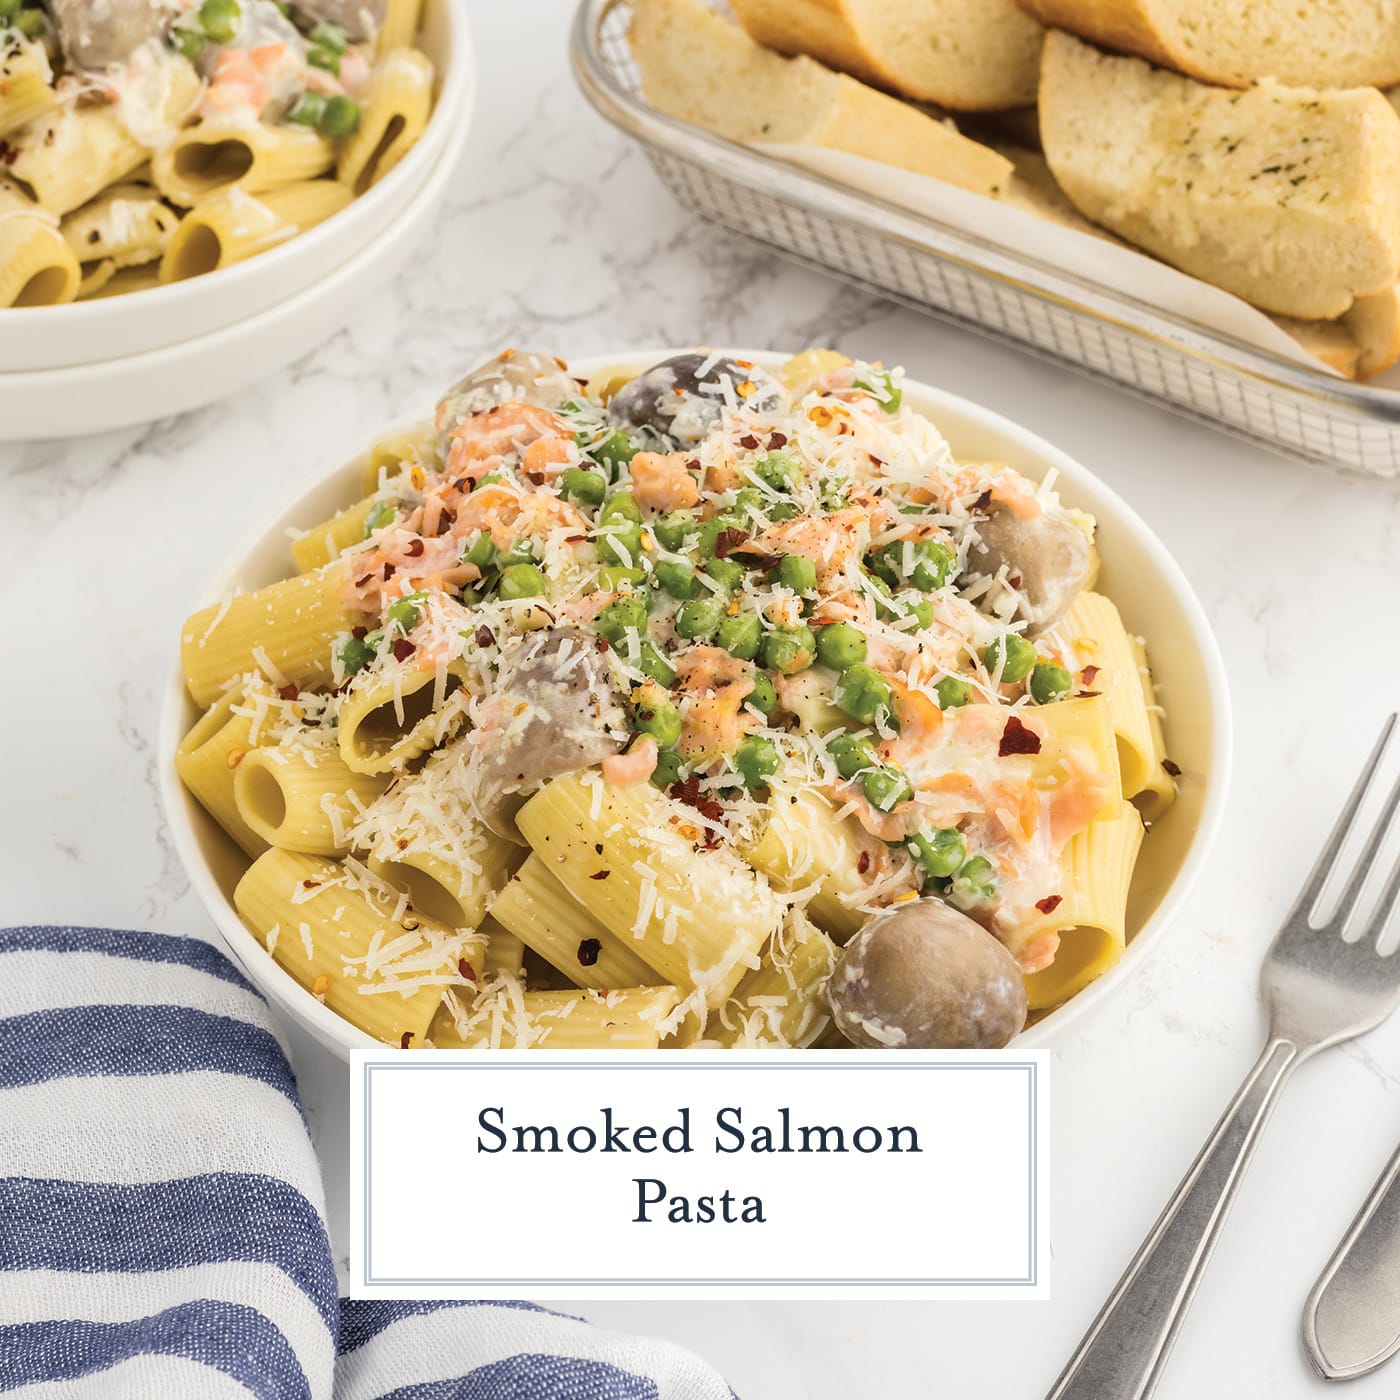 bowl of smoked salmon pasta with text overlay for facebook